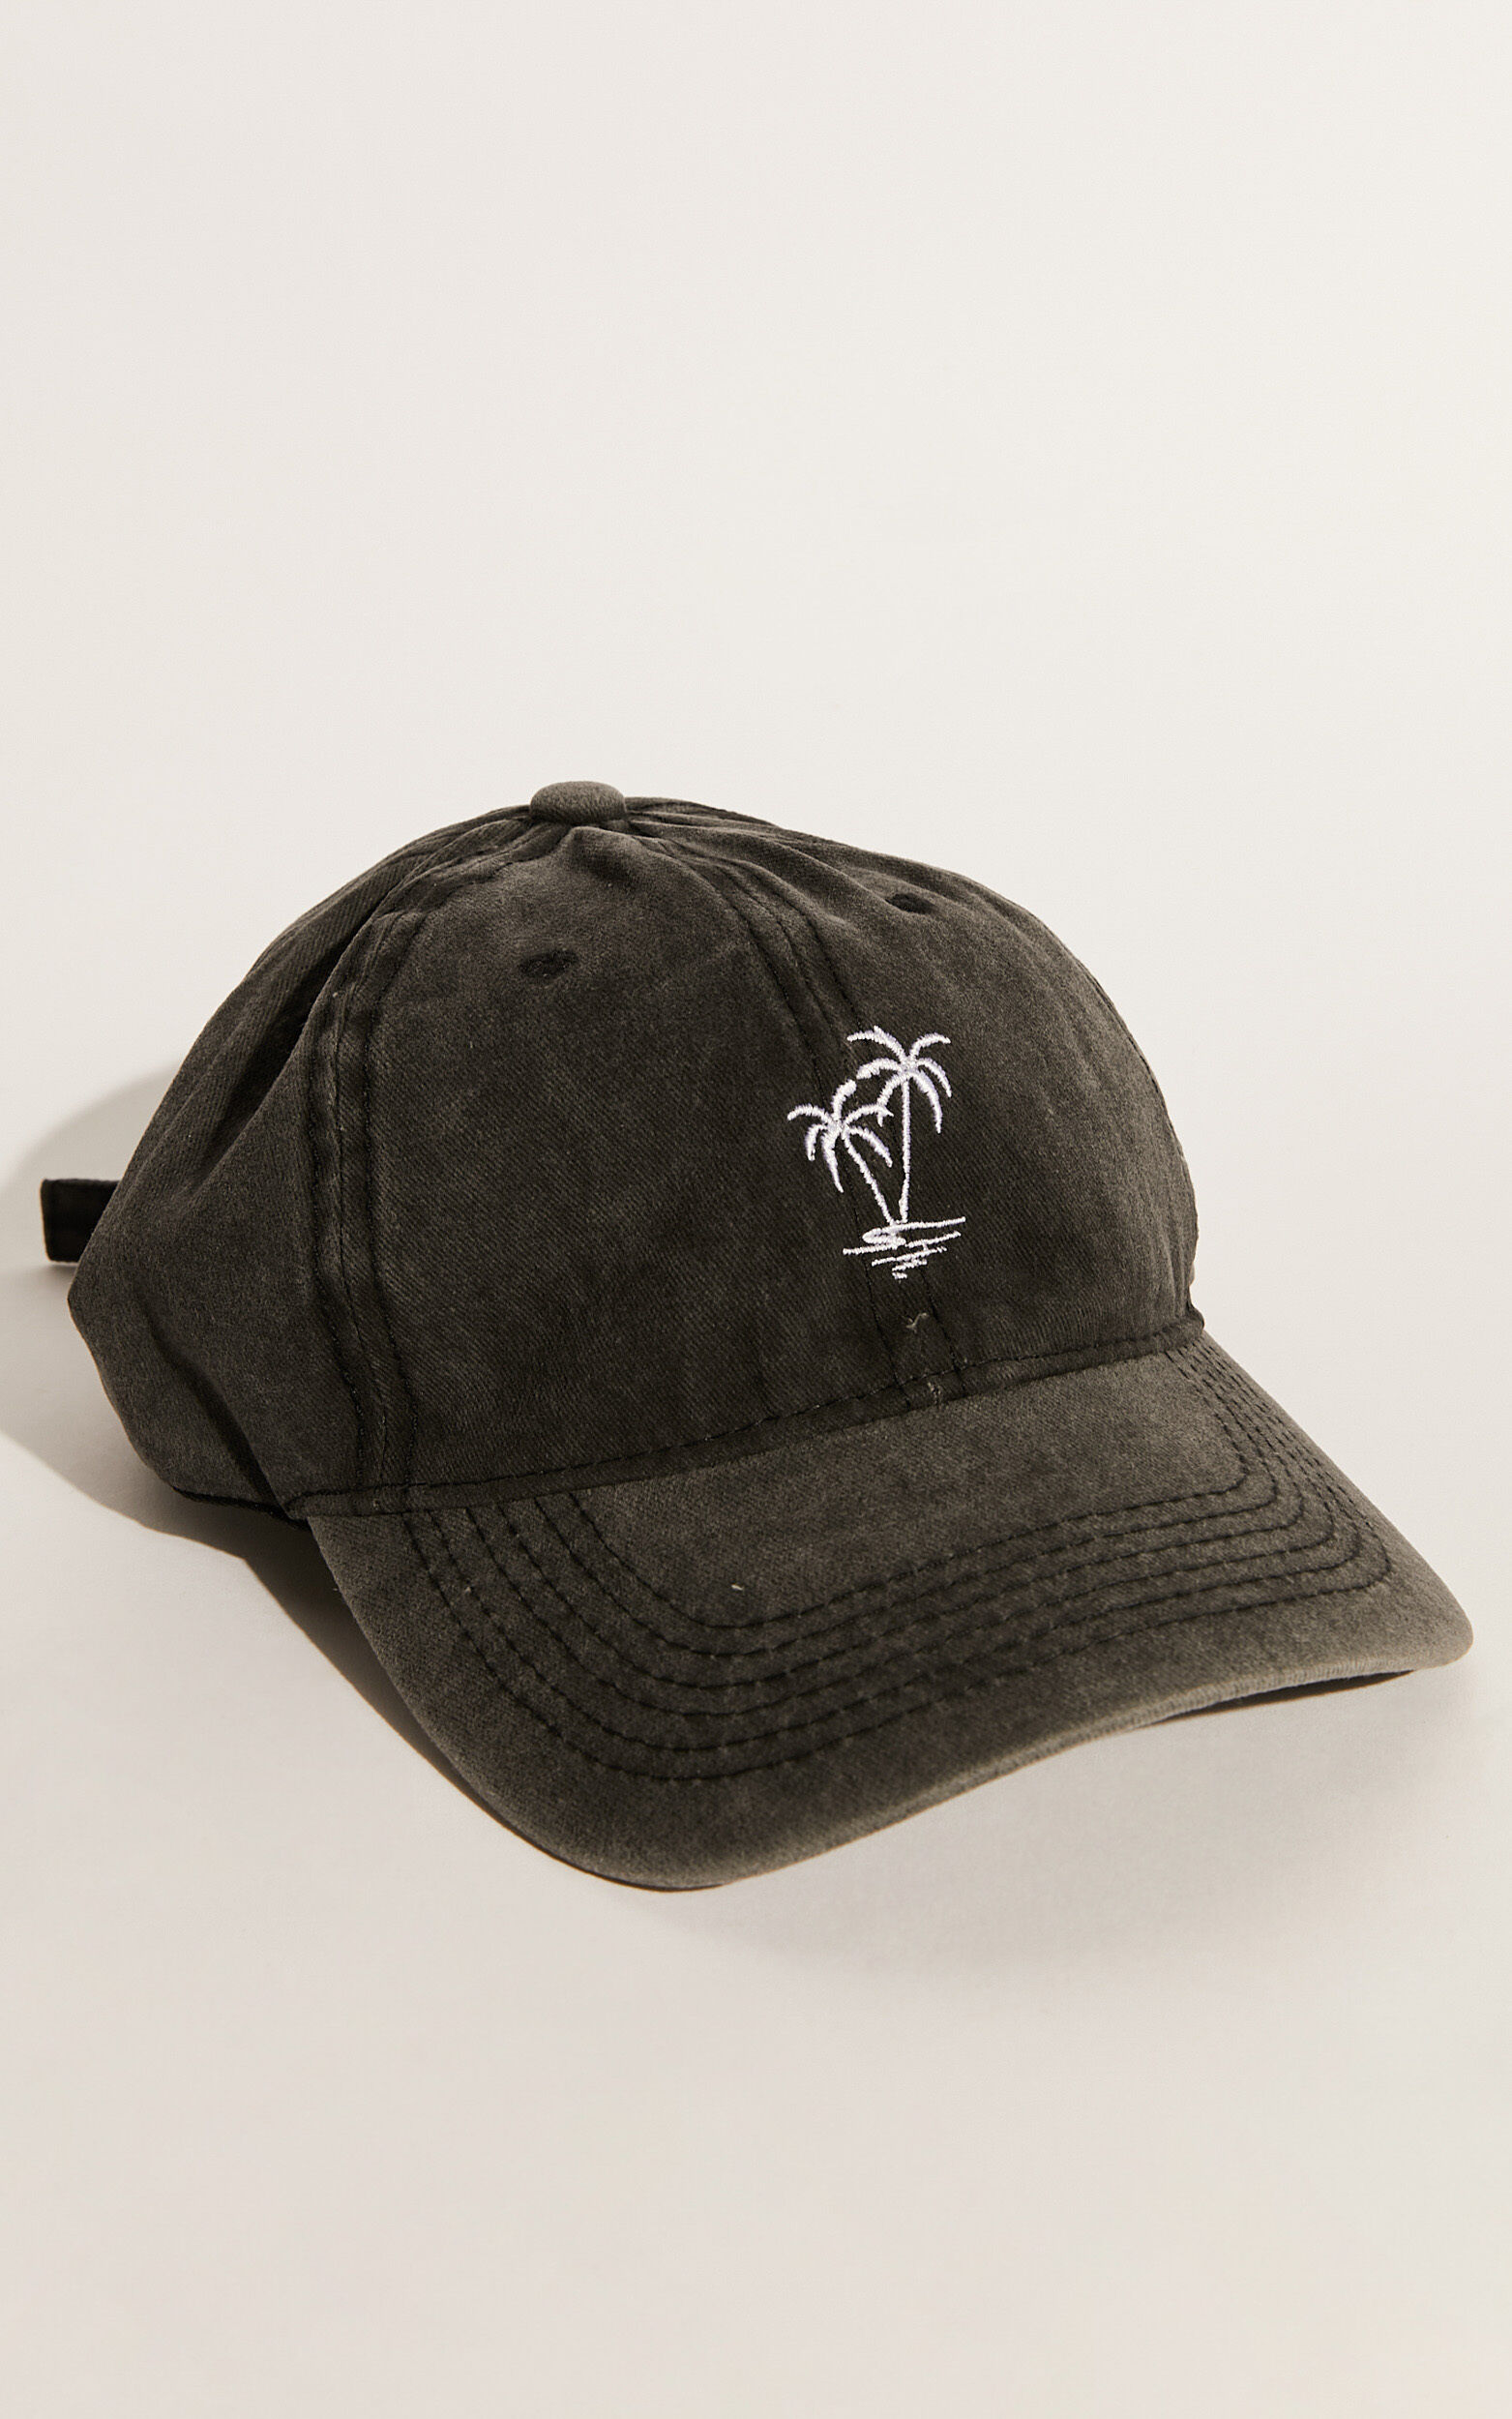 Lidiane Cap - Embroidered Palm Tree Cap in Dark Grey - NoSize, GRY1